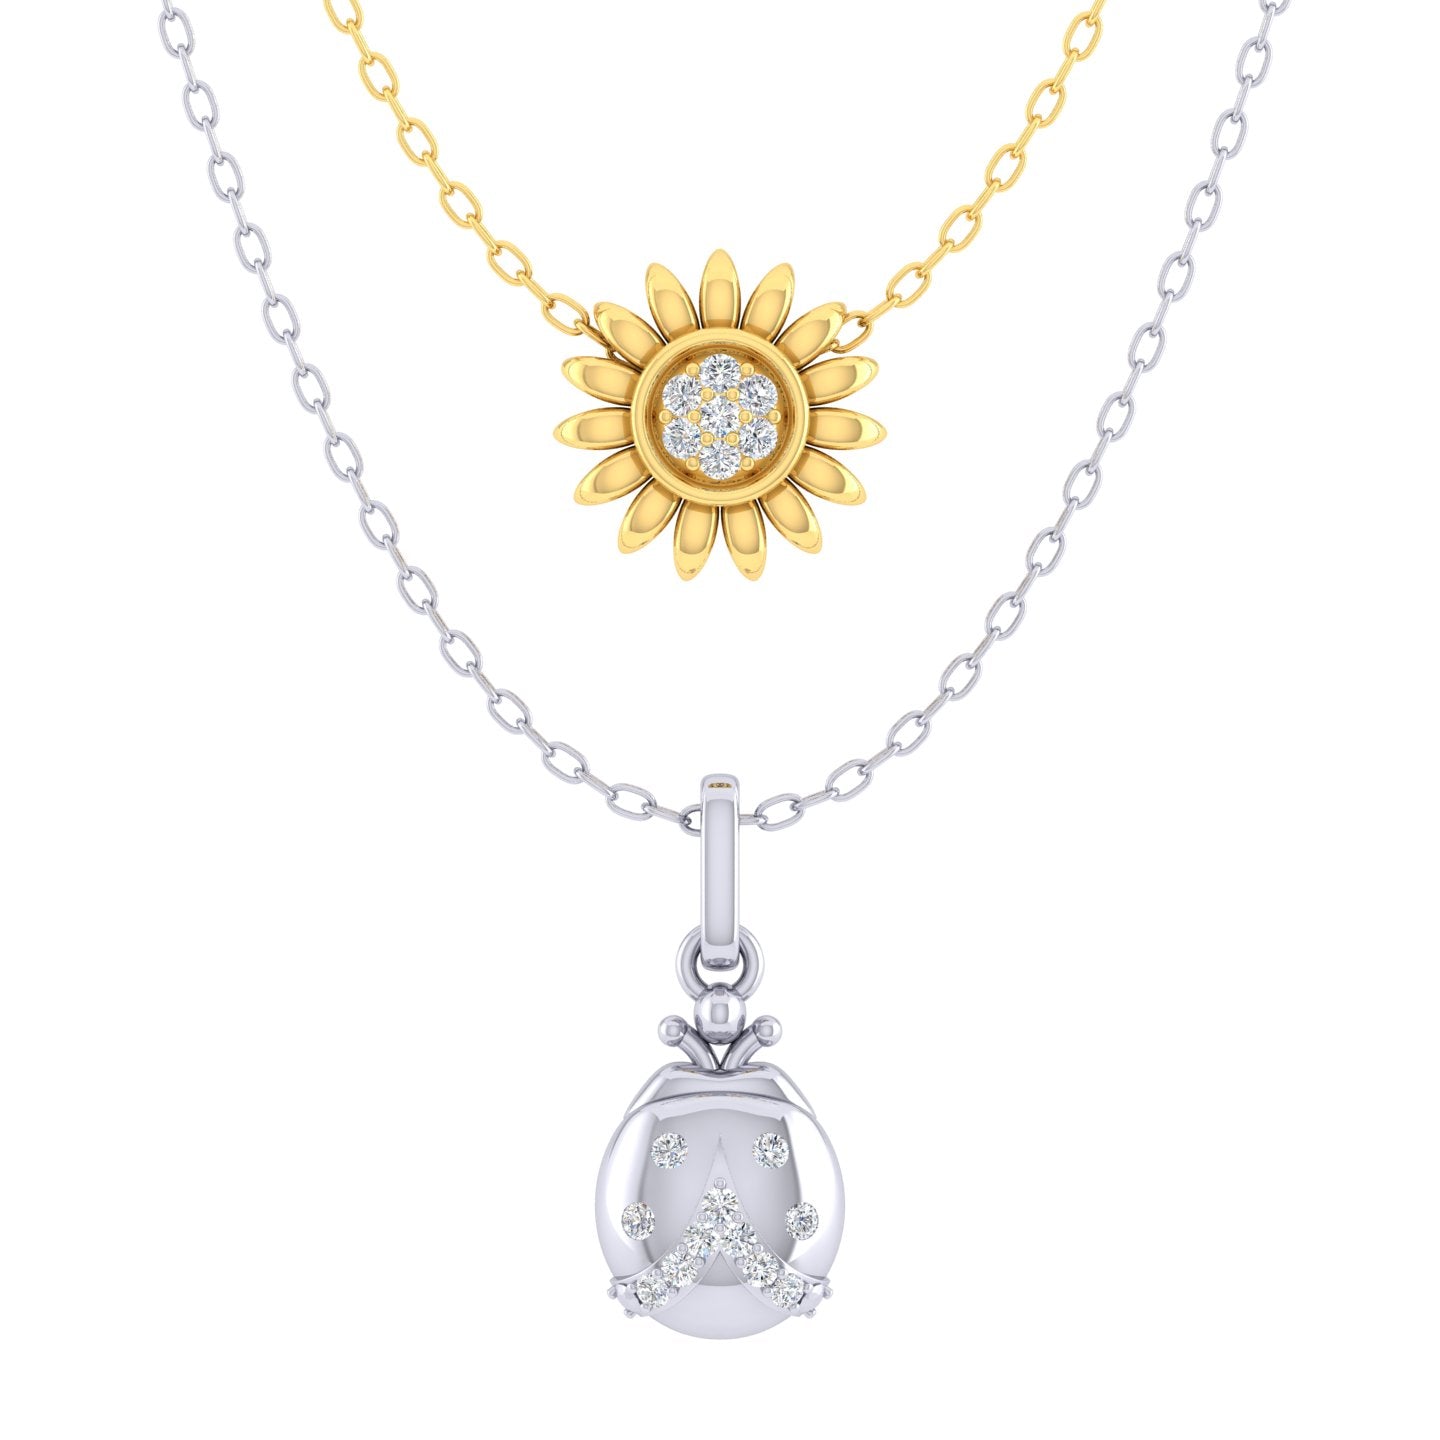 LadyBug and SunFlower Layered 1/10 Cttw Natural Diamond Pendant Necklace set in 925 Sterling (Silver & Yellow Gold fine jewelry gift